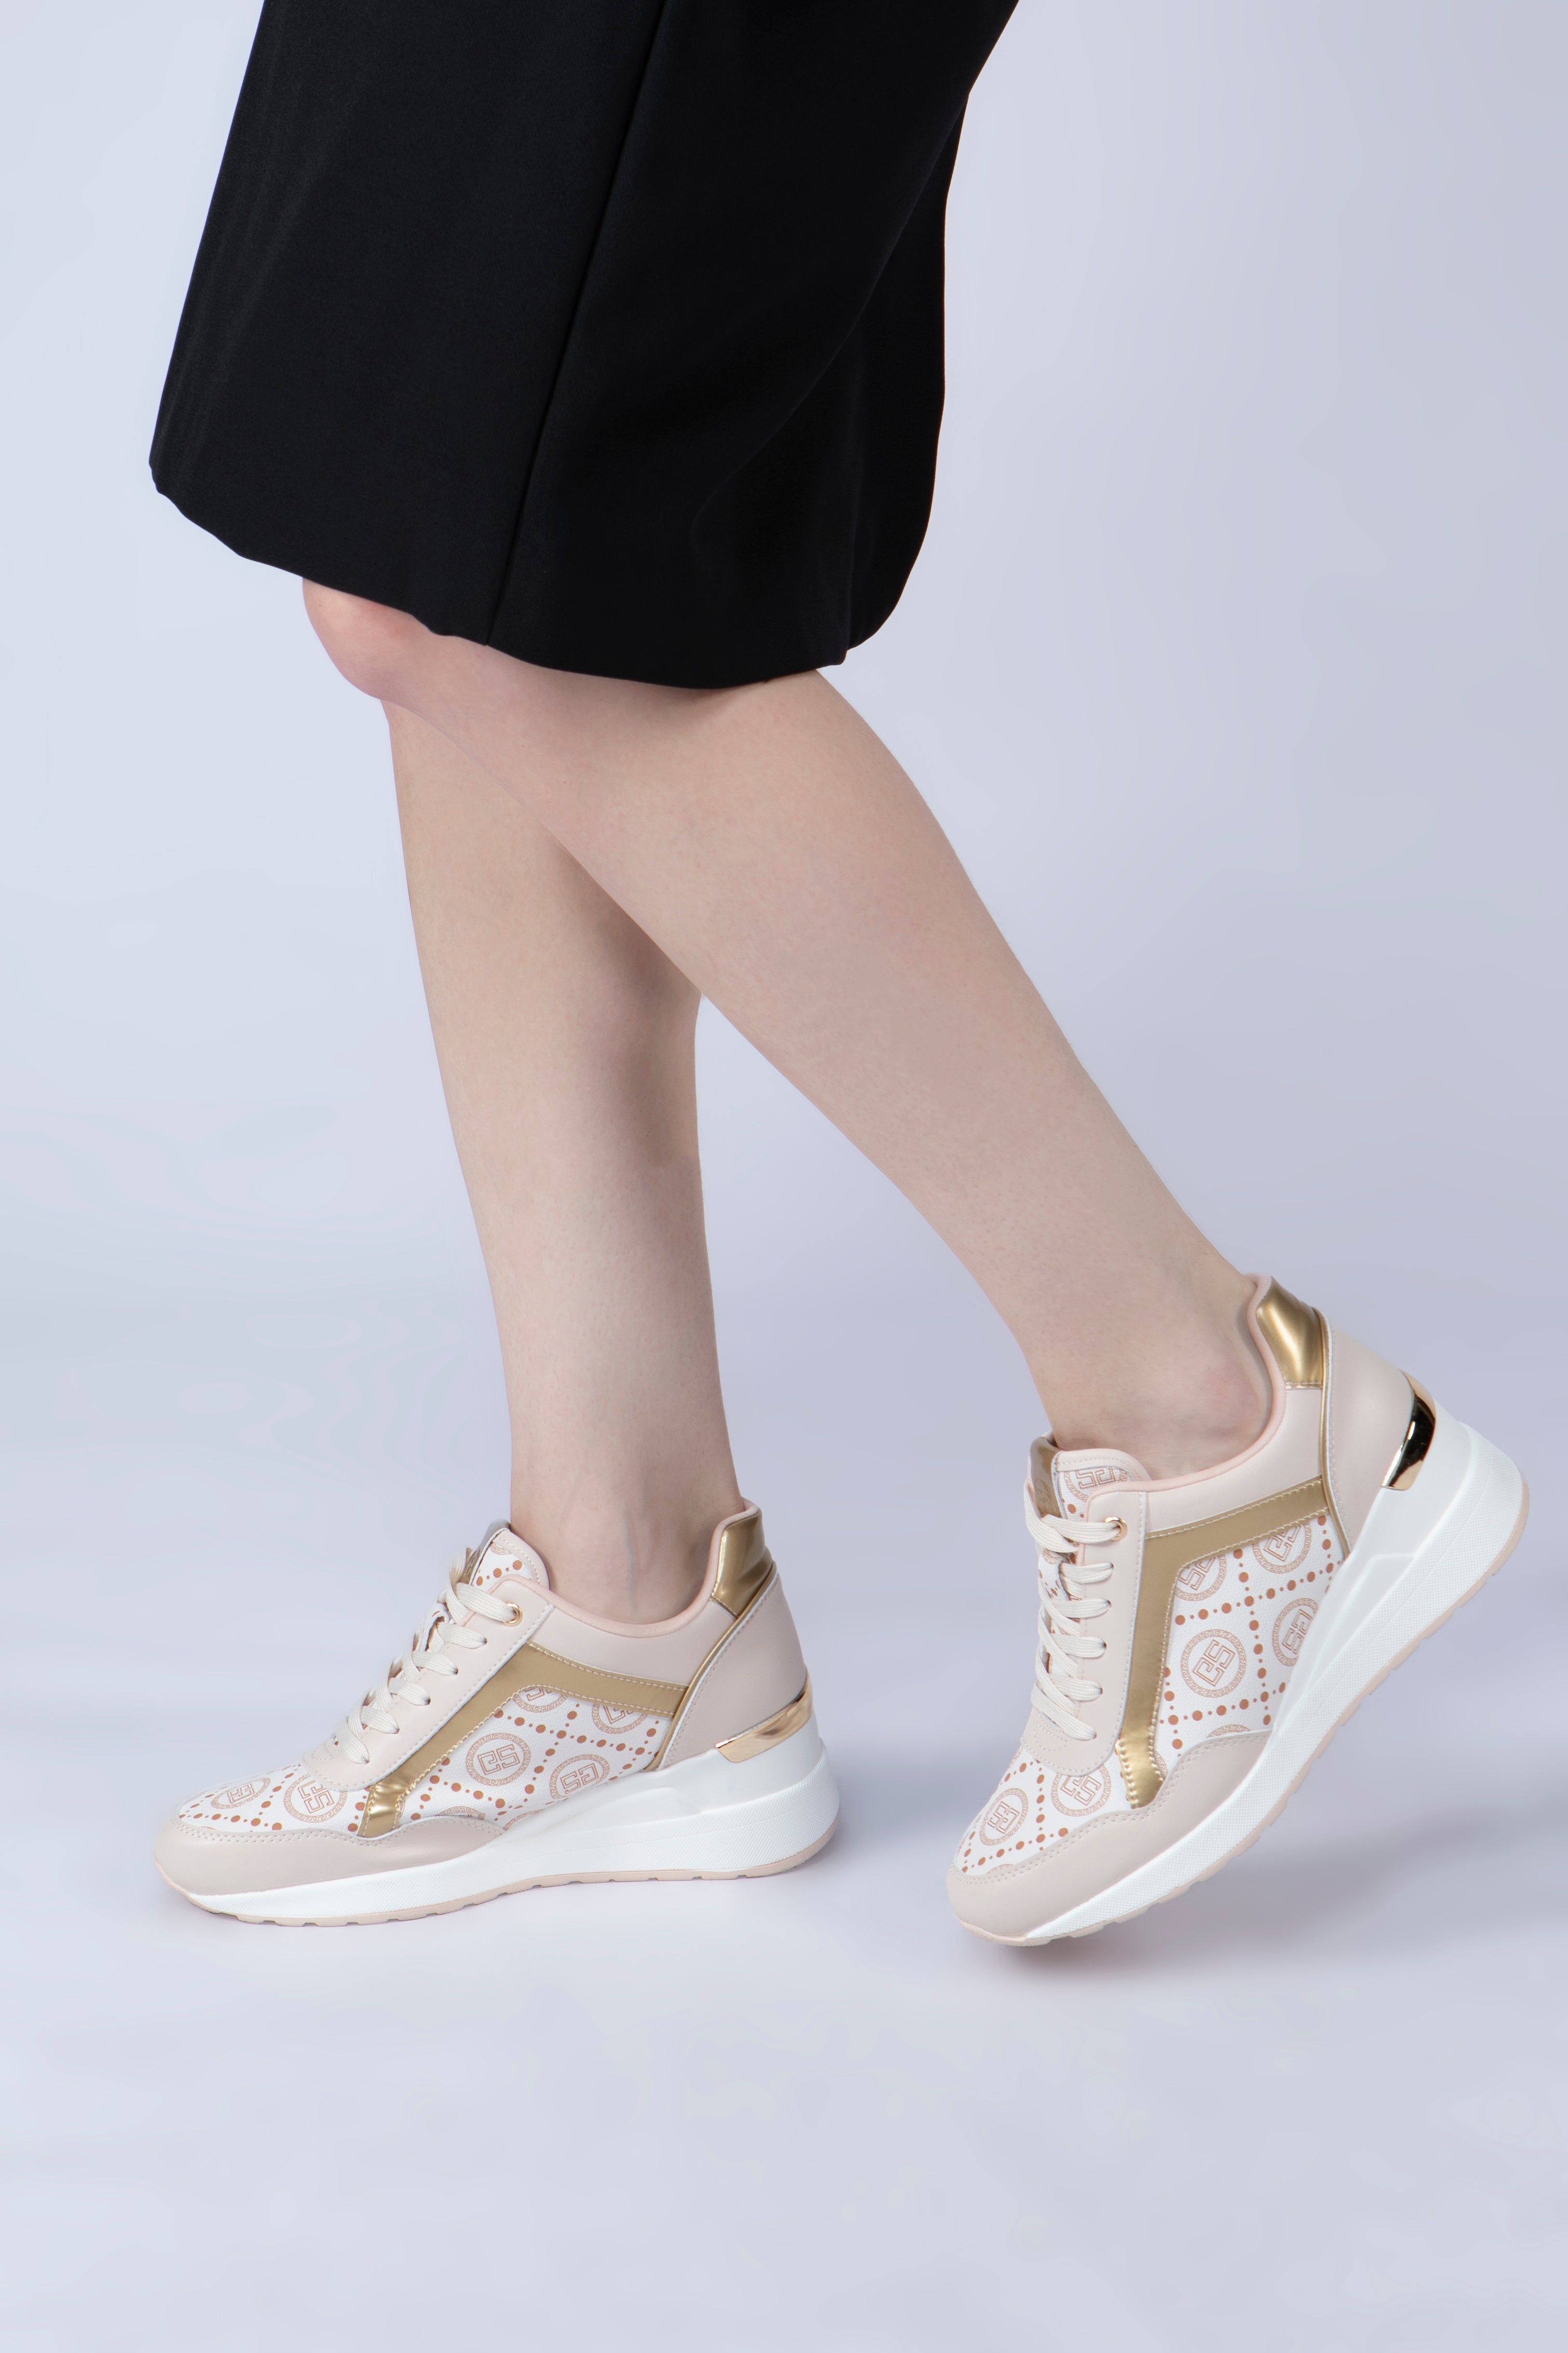 Women's Saga style sneakers in beige with gold detailing